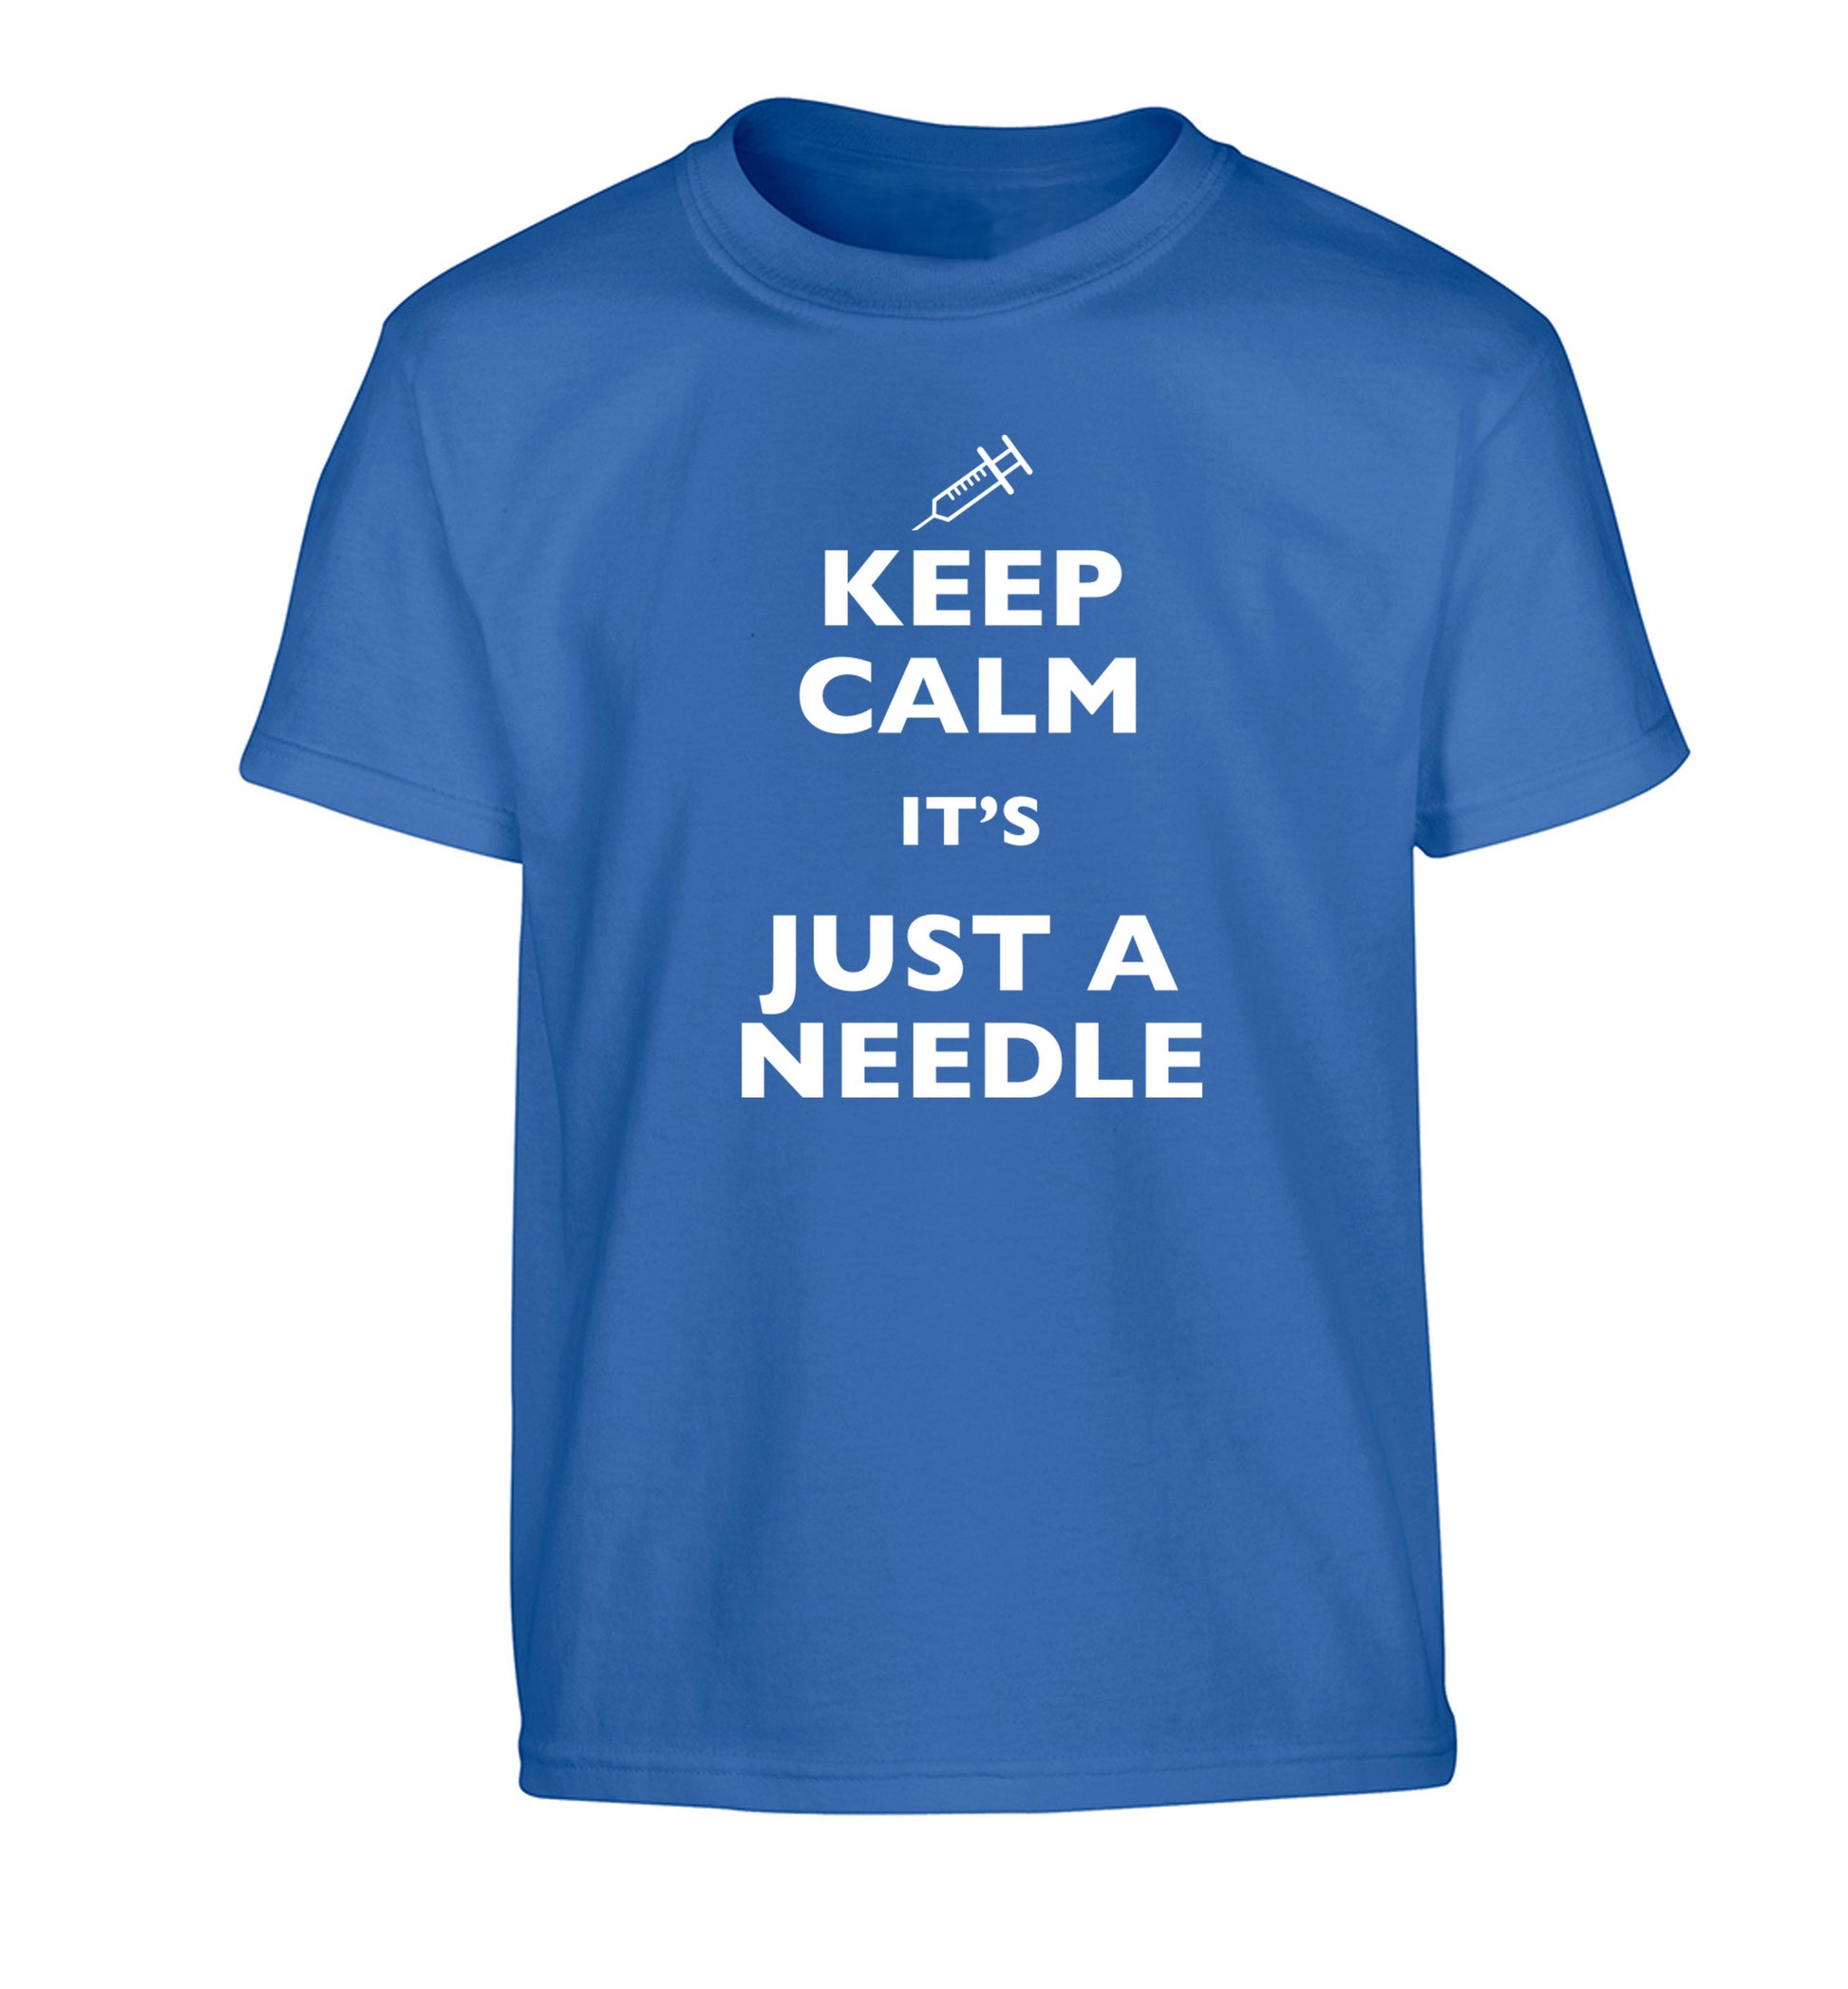 Keep calm it's only a needle Children's blue Tshirt 12-14 Years